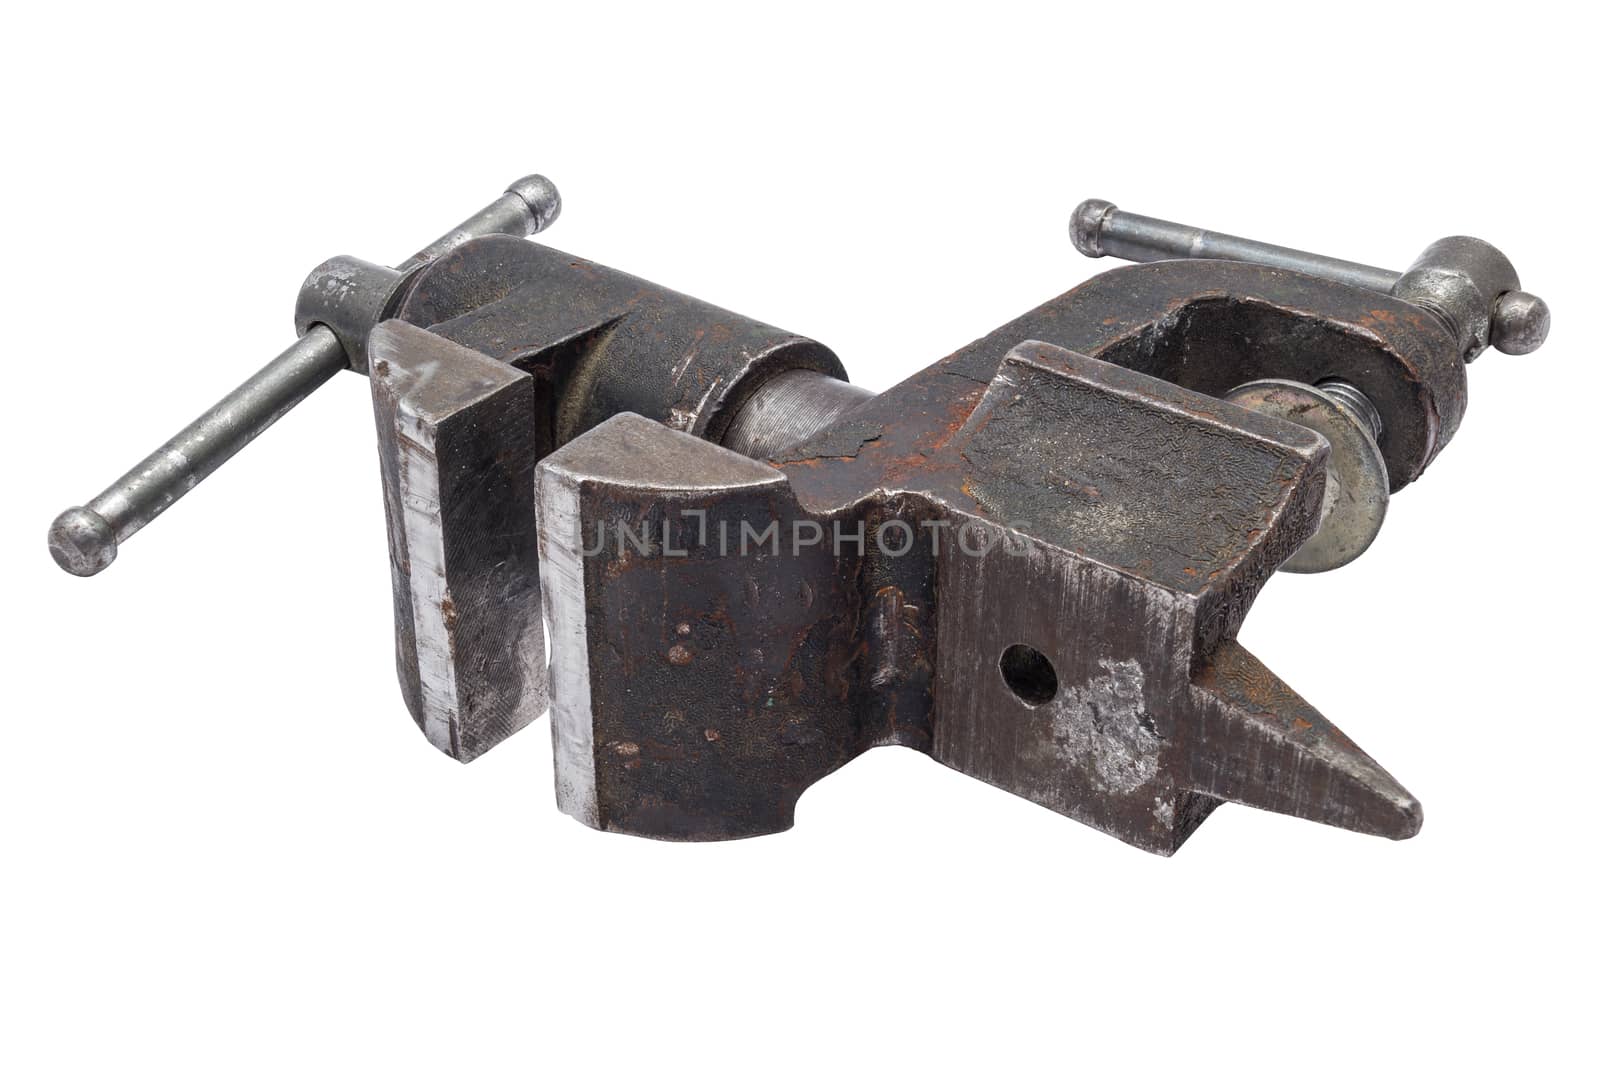 Old metal vise isolaed on white background